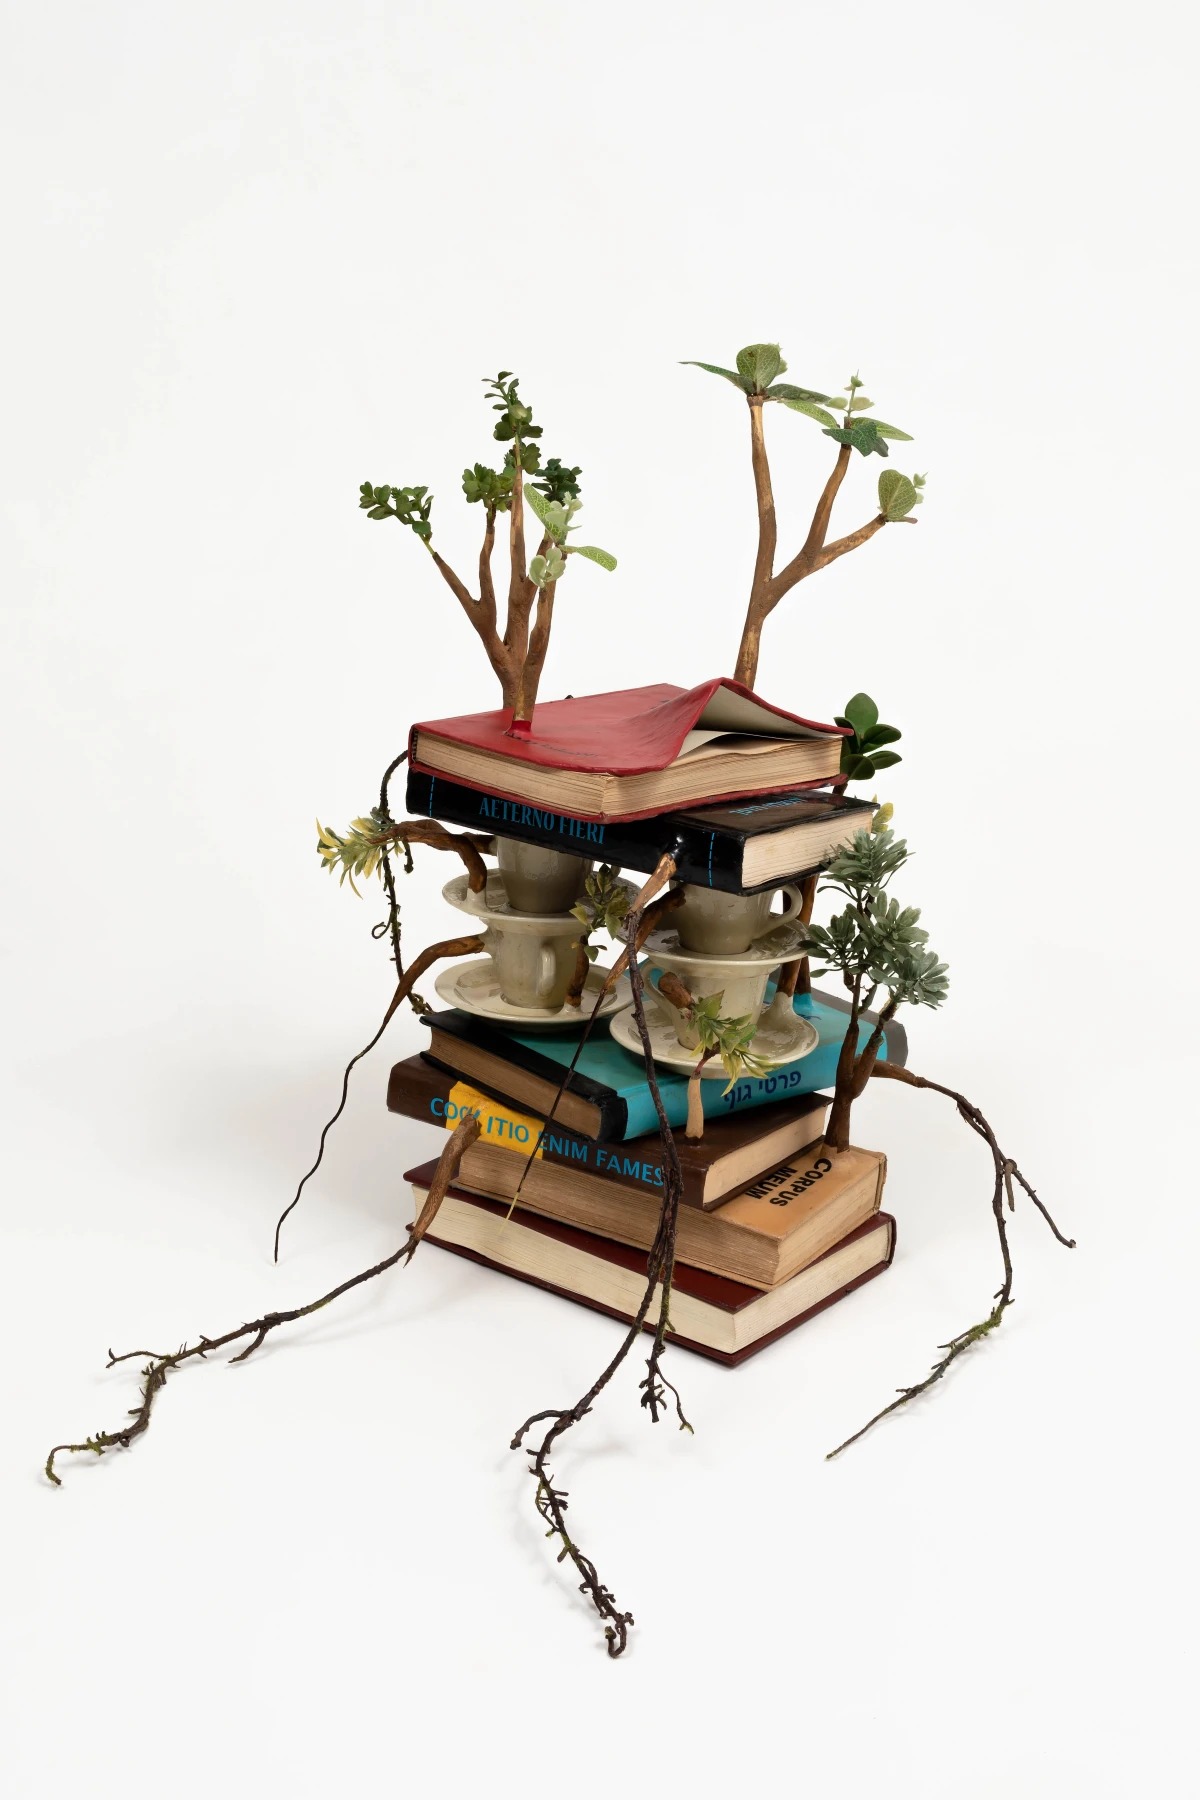 Art And Nature Humorous Wooden Sculptures With Sprouted Wooden Limbs By Camille Kachani 2